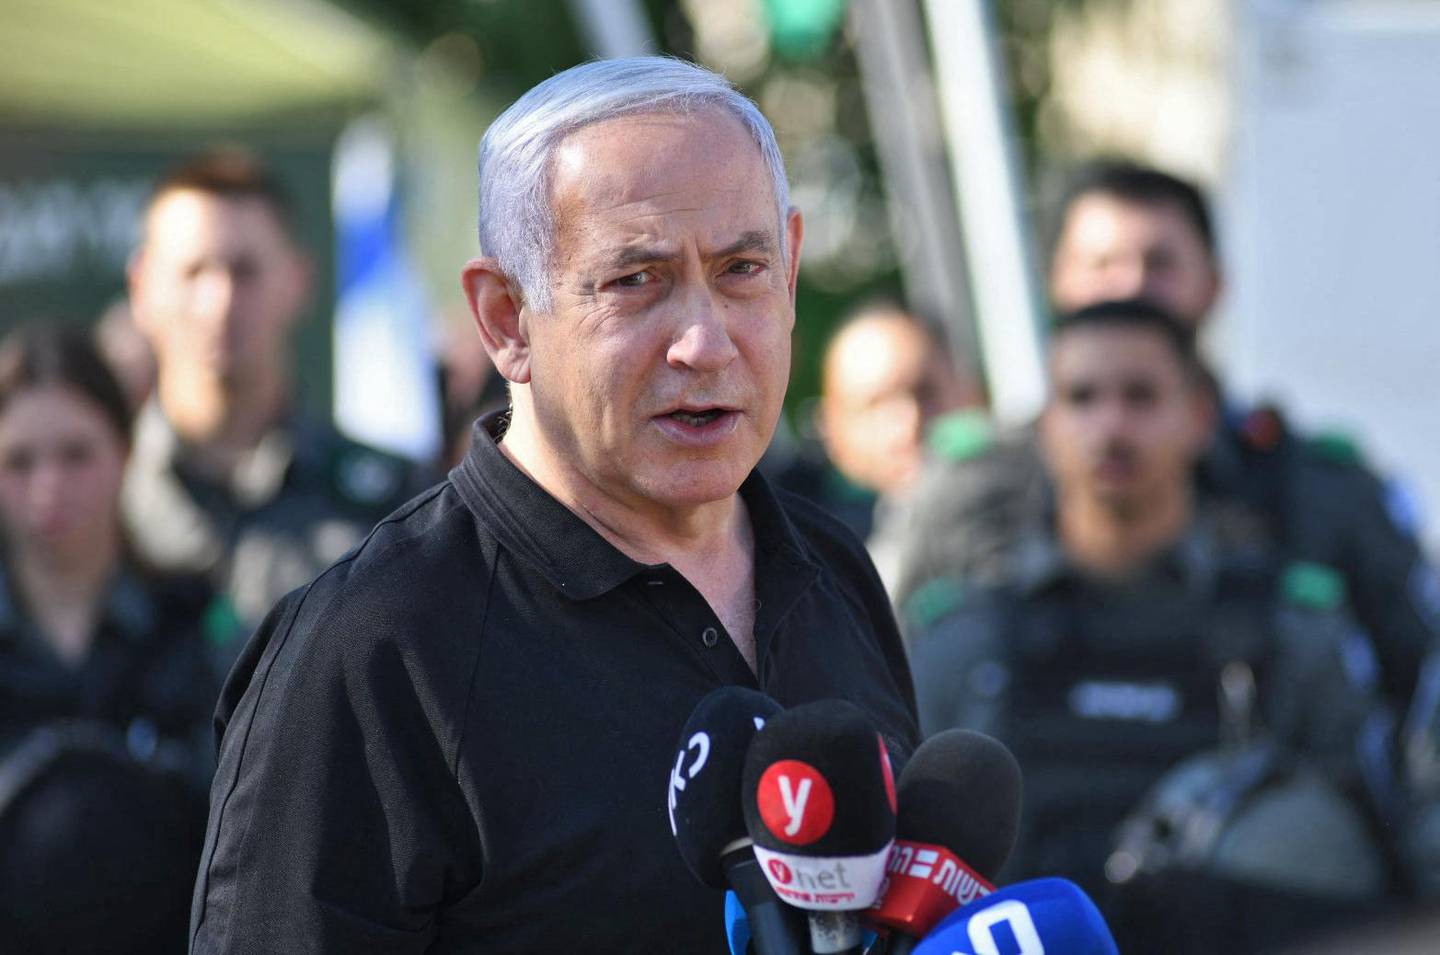 Israeli Prime Minister Benjamin Netanyahu speaks during a meeting with Israeli border police in the central city of Lod, near Tel Aviv, on May 13, 2021, a day after Israeli far-right groups clashed with security forces and Arab Israelis. Late on May 12, Israeli far-right groups took to the streets across the country, clashing with security forces and Arab Israelis. Police said they had responded to violence in multiple towns, including Lod, Acre and Haifa. A state of emergency has been declared with entry restrictions and a curfew in the mixed Jewish-Arab city of Lod, where an Arab resident was shot dead and a synagogue torched. / AFP / POOL / Yuval CHEN
